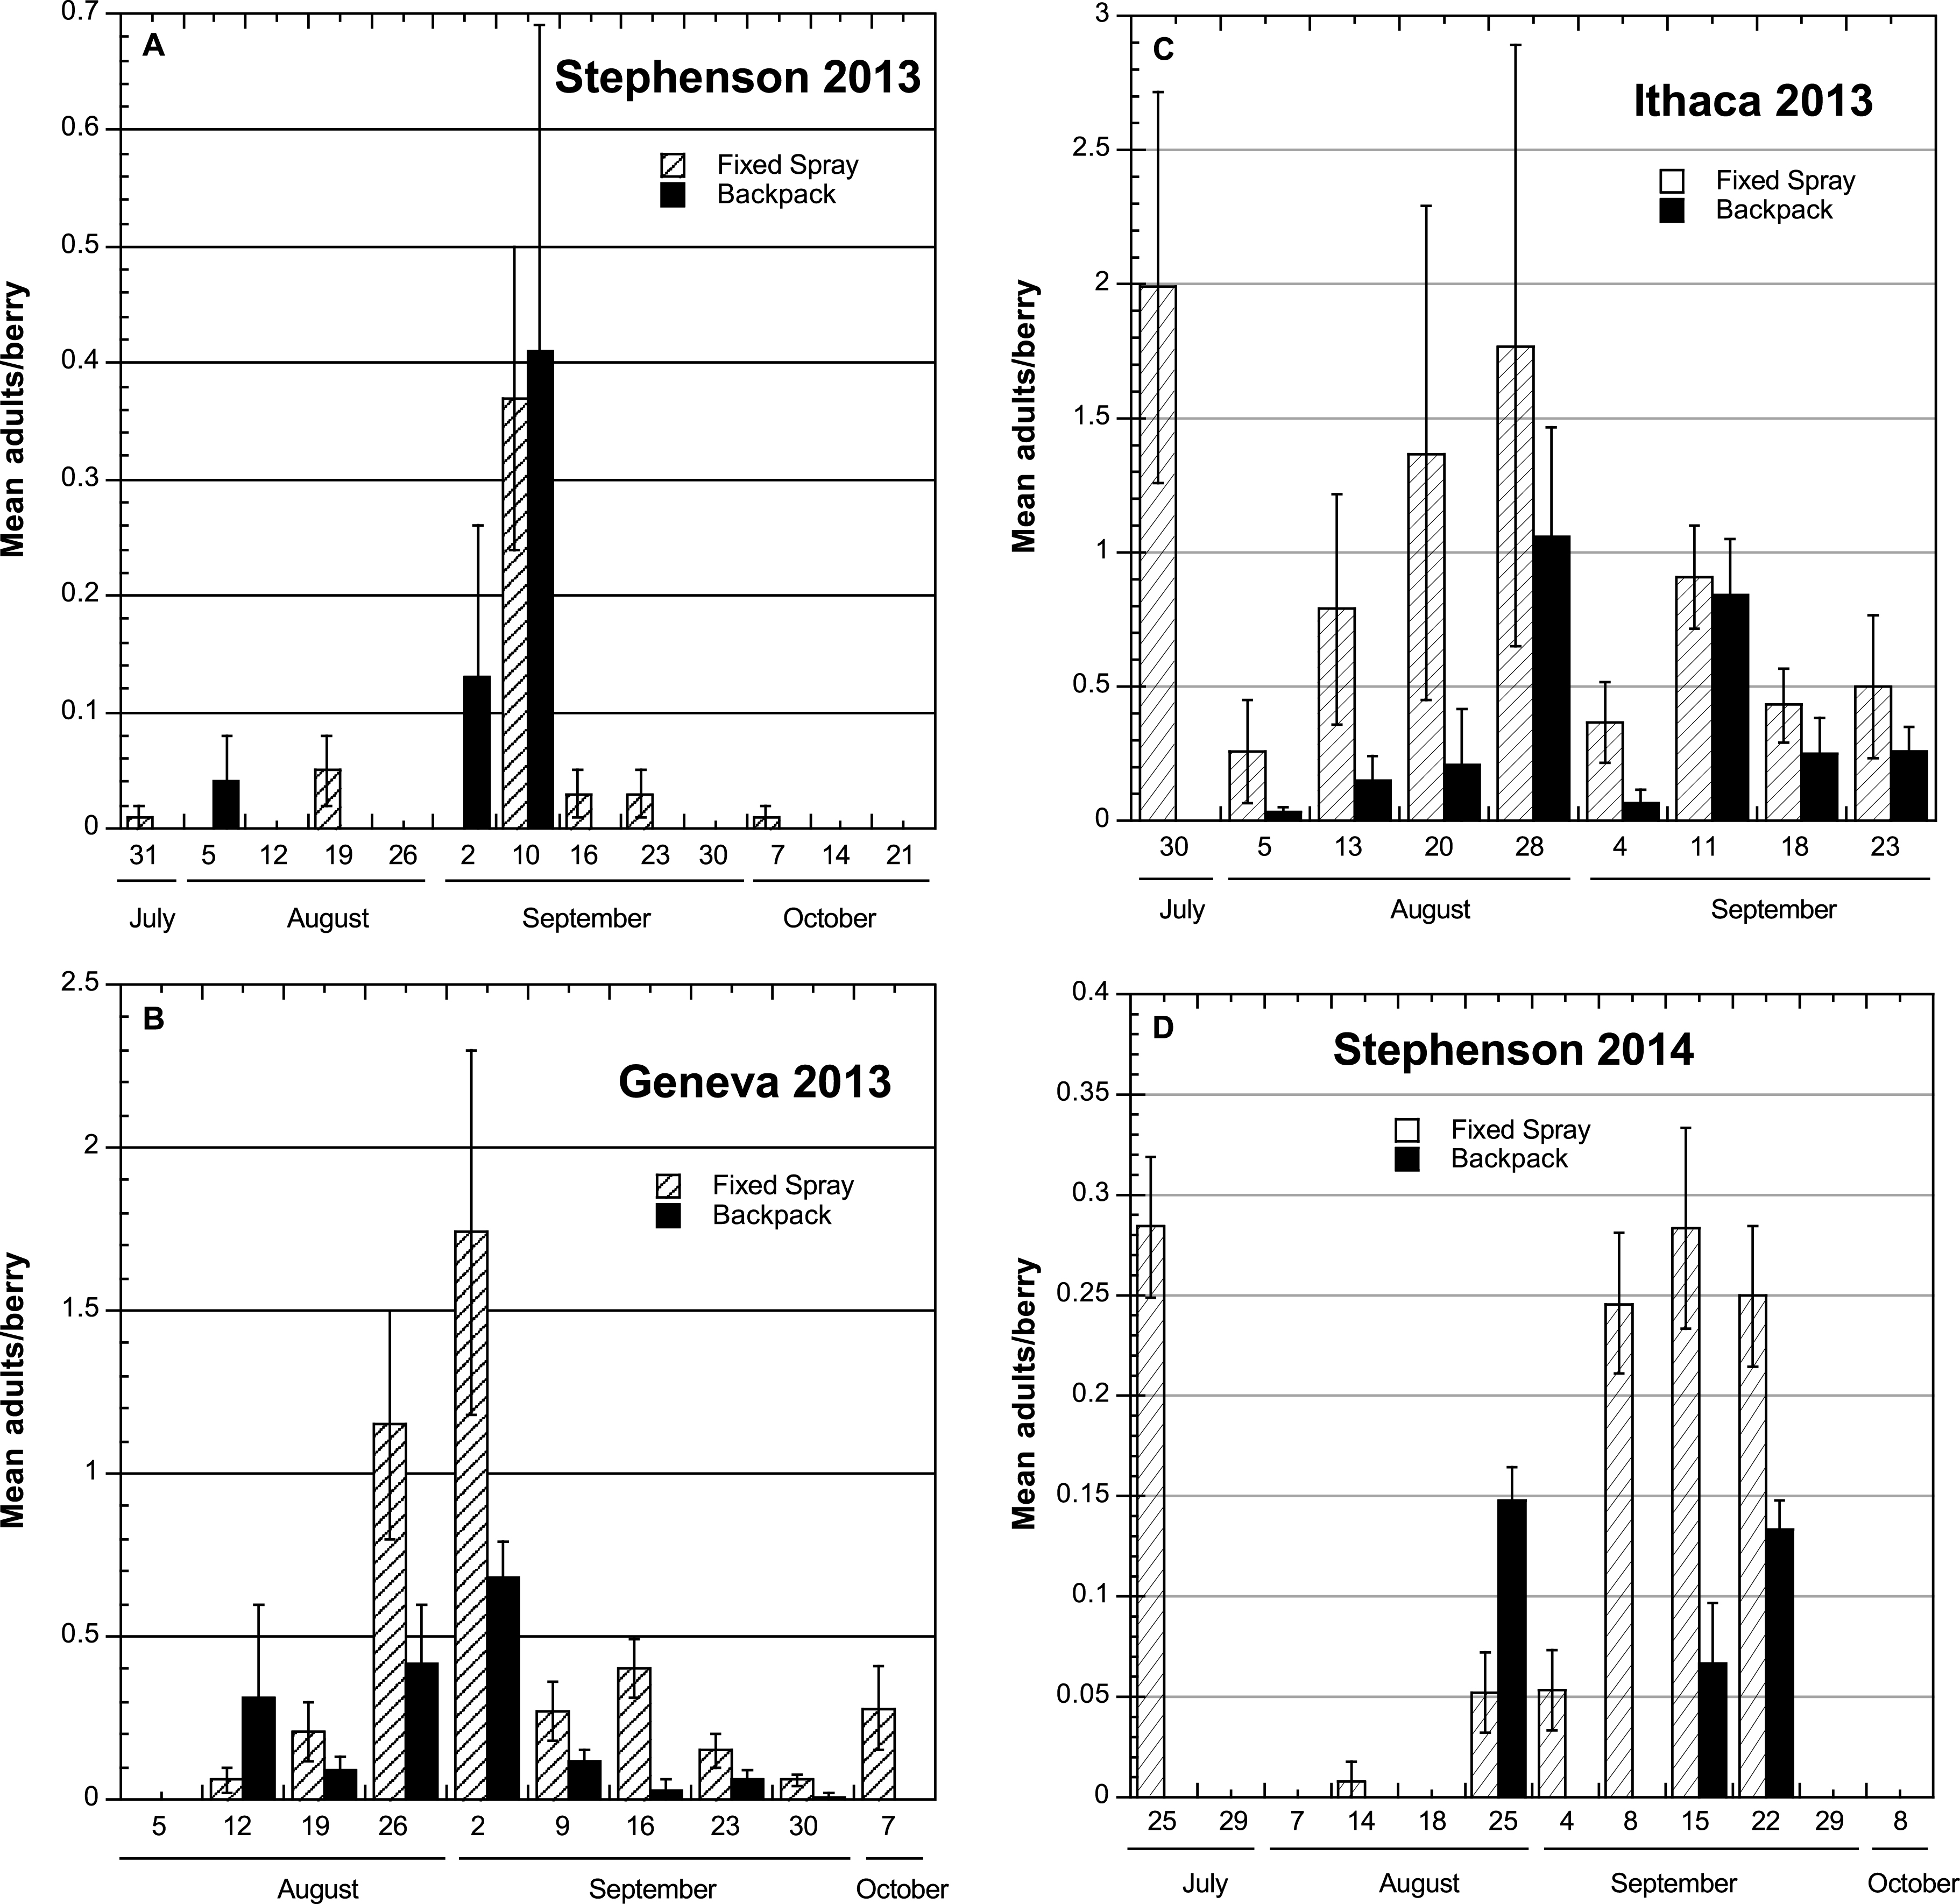 Time course of mean numbers (±SEM) of Spotted Wing Drosophila adults emerging from individual samples of berries held under laboratory conditions to assess infestation levels after treatment using either fixed-spray or backpack pesticide applications in commercial and research high tunnel sites, NY 2013-2014.